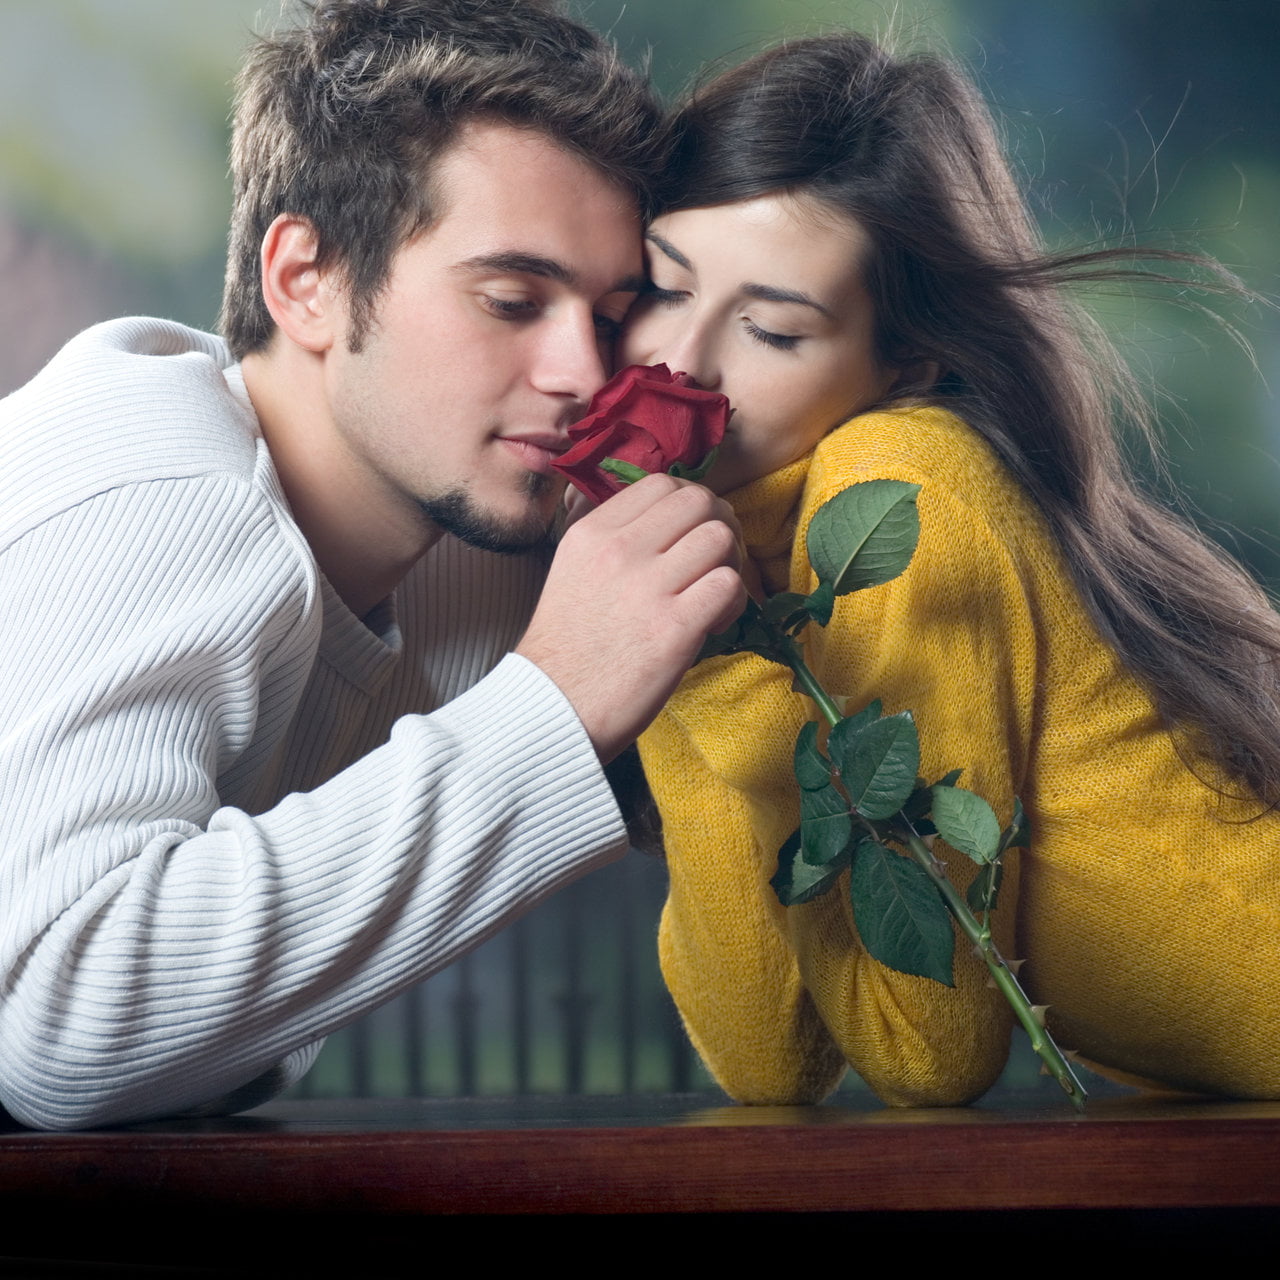 8 Signs You’ve Found Love and Mr. Right